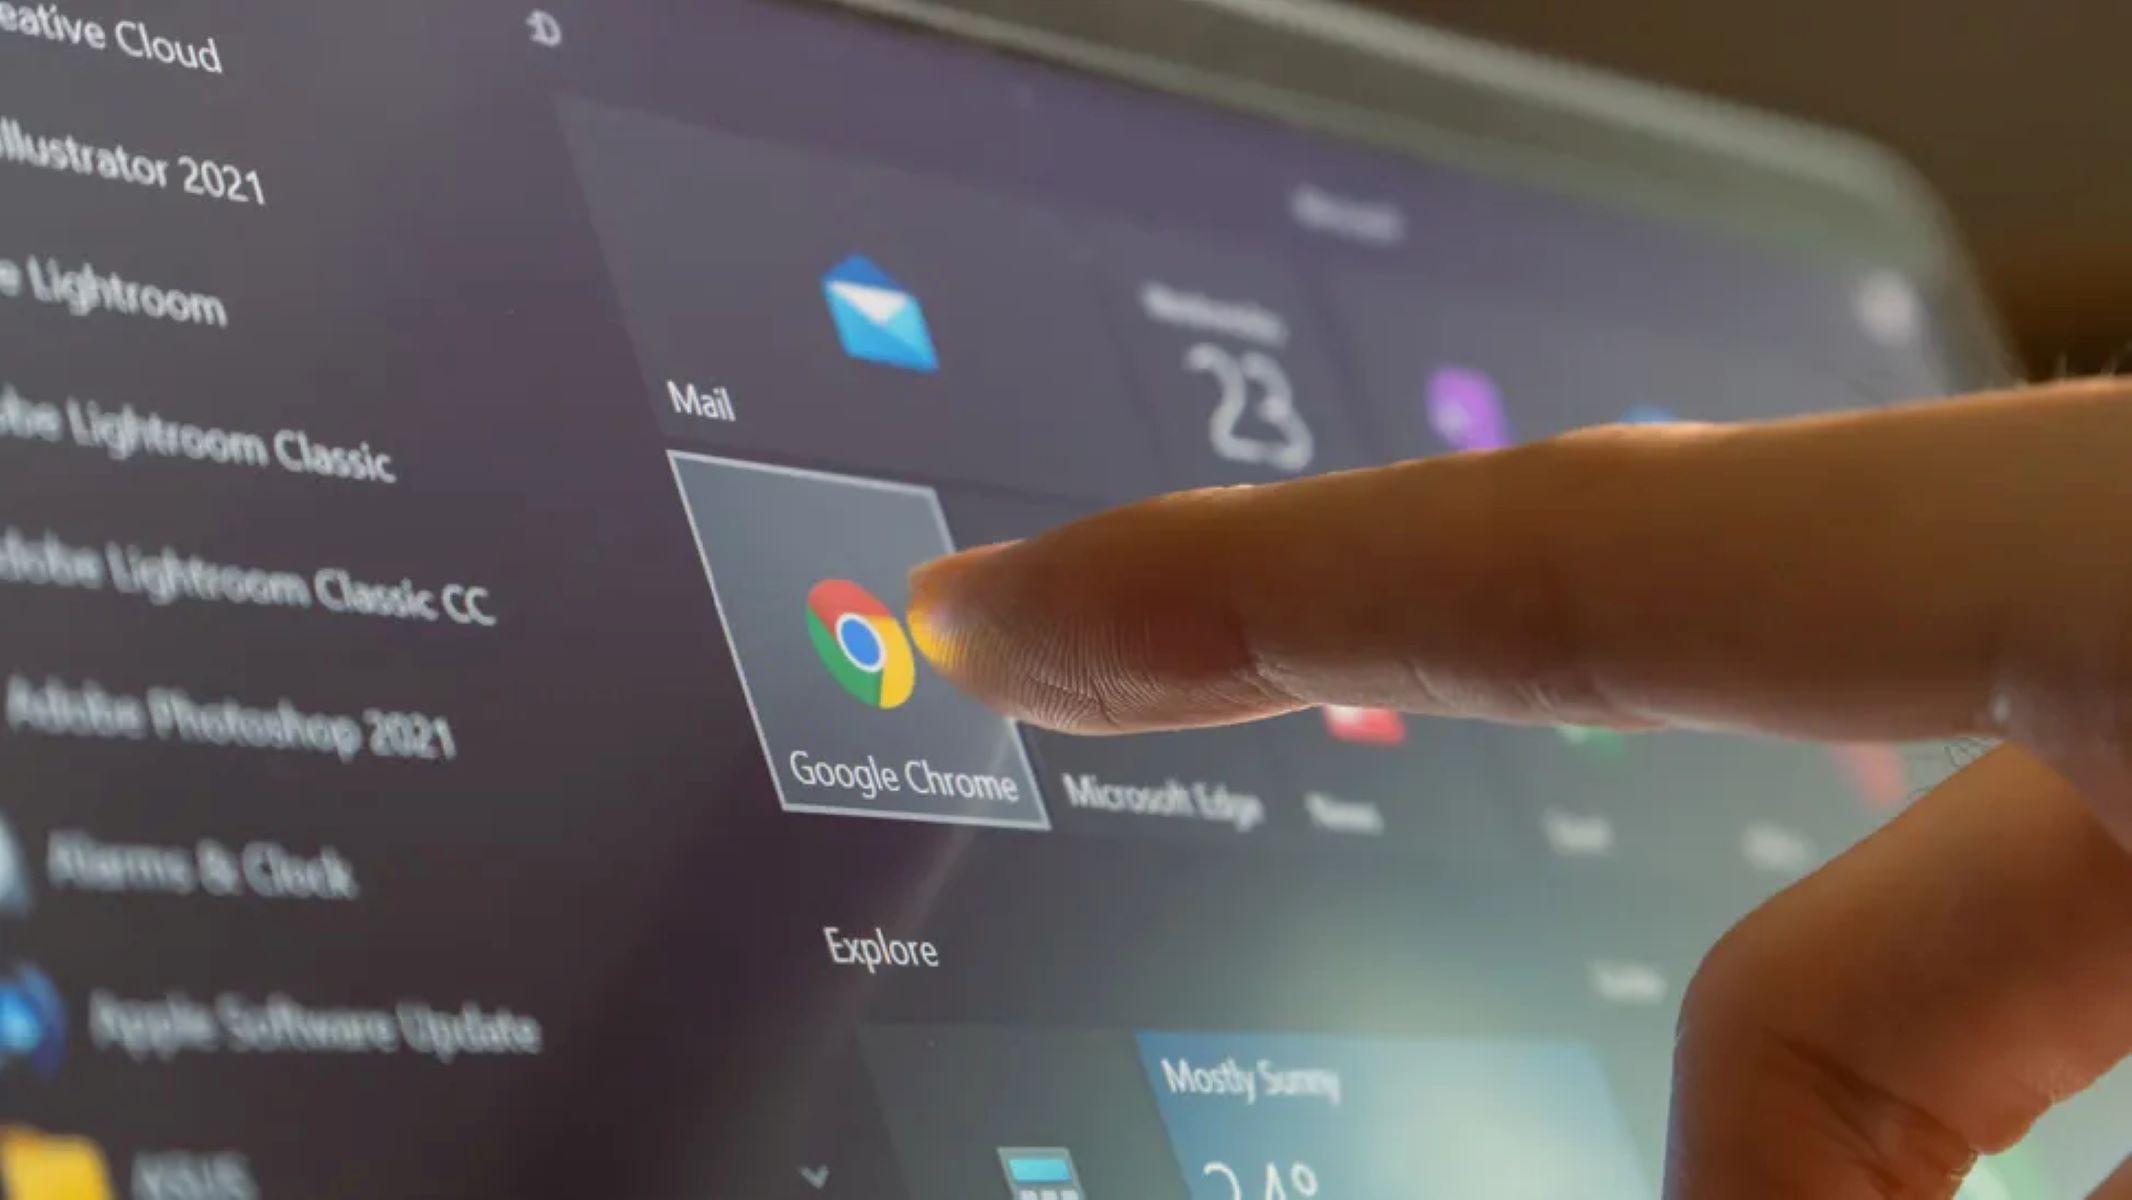 Google Chrome Unveils A Fresh Look And Enhanced Search Features To Celebrate 15th Anniversary